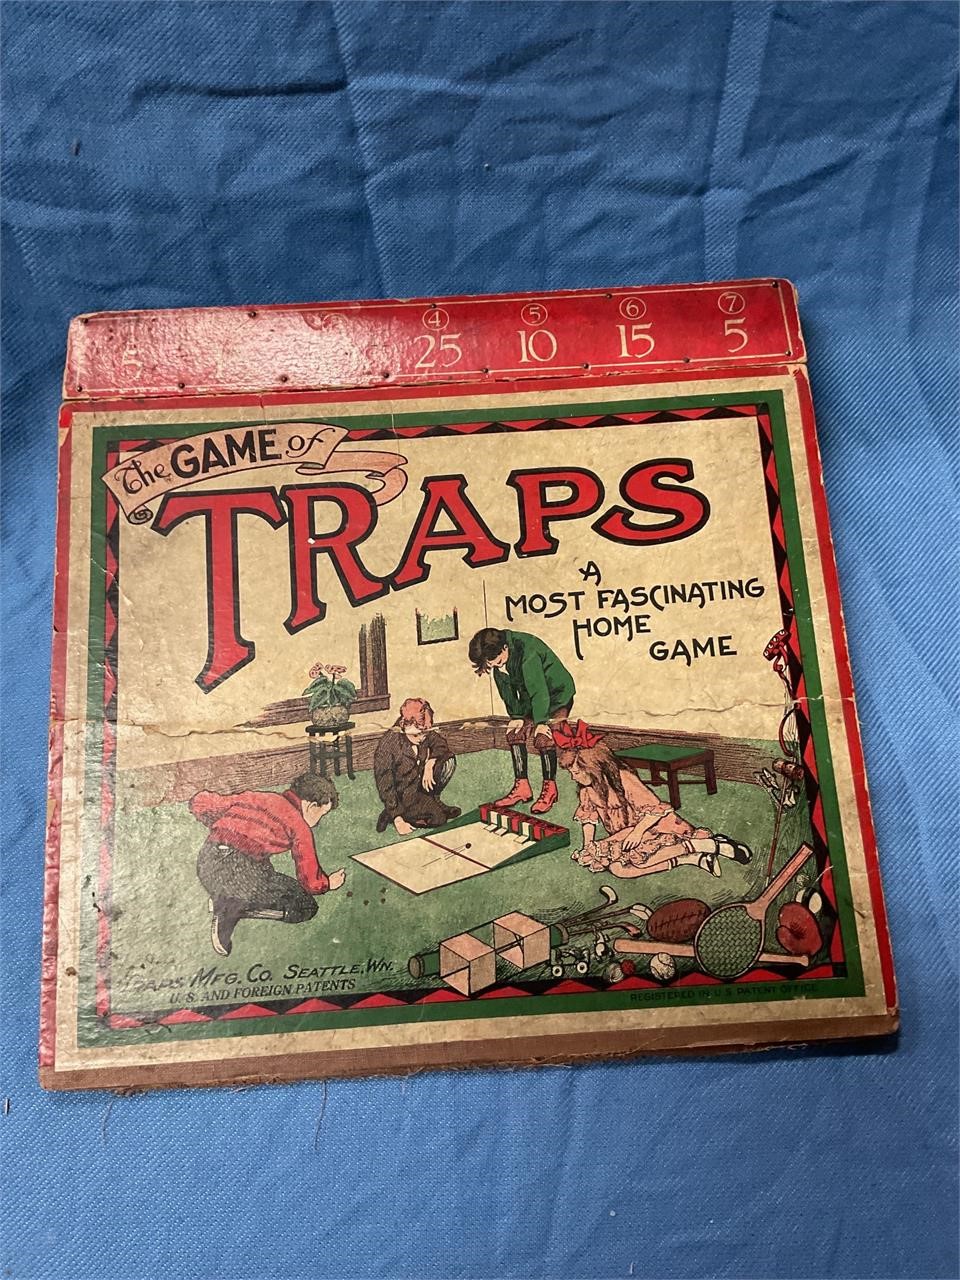 Vintage game of traps board game